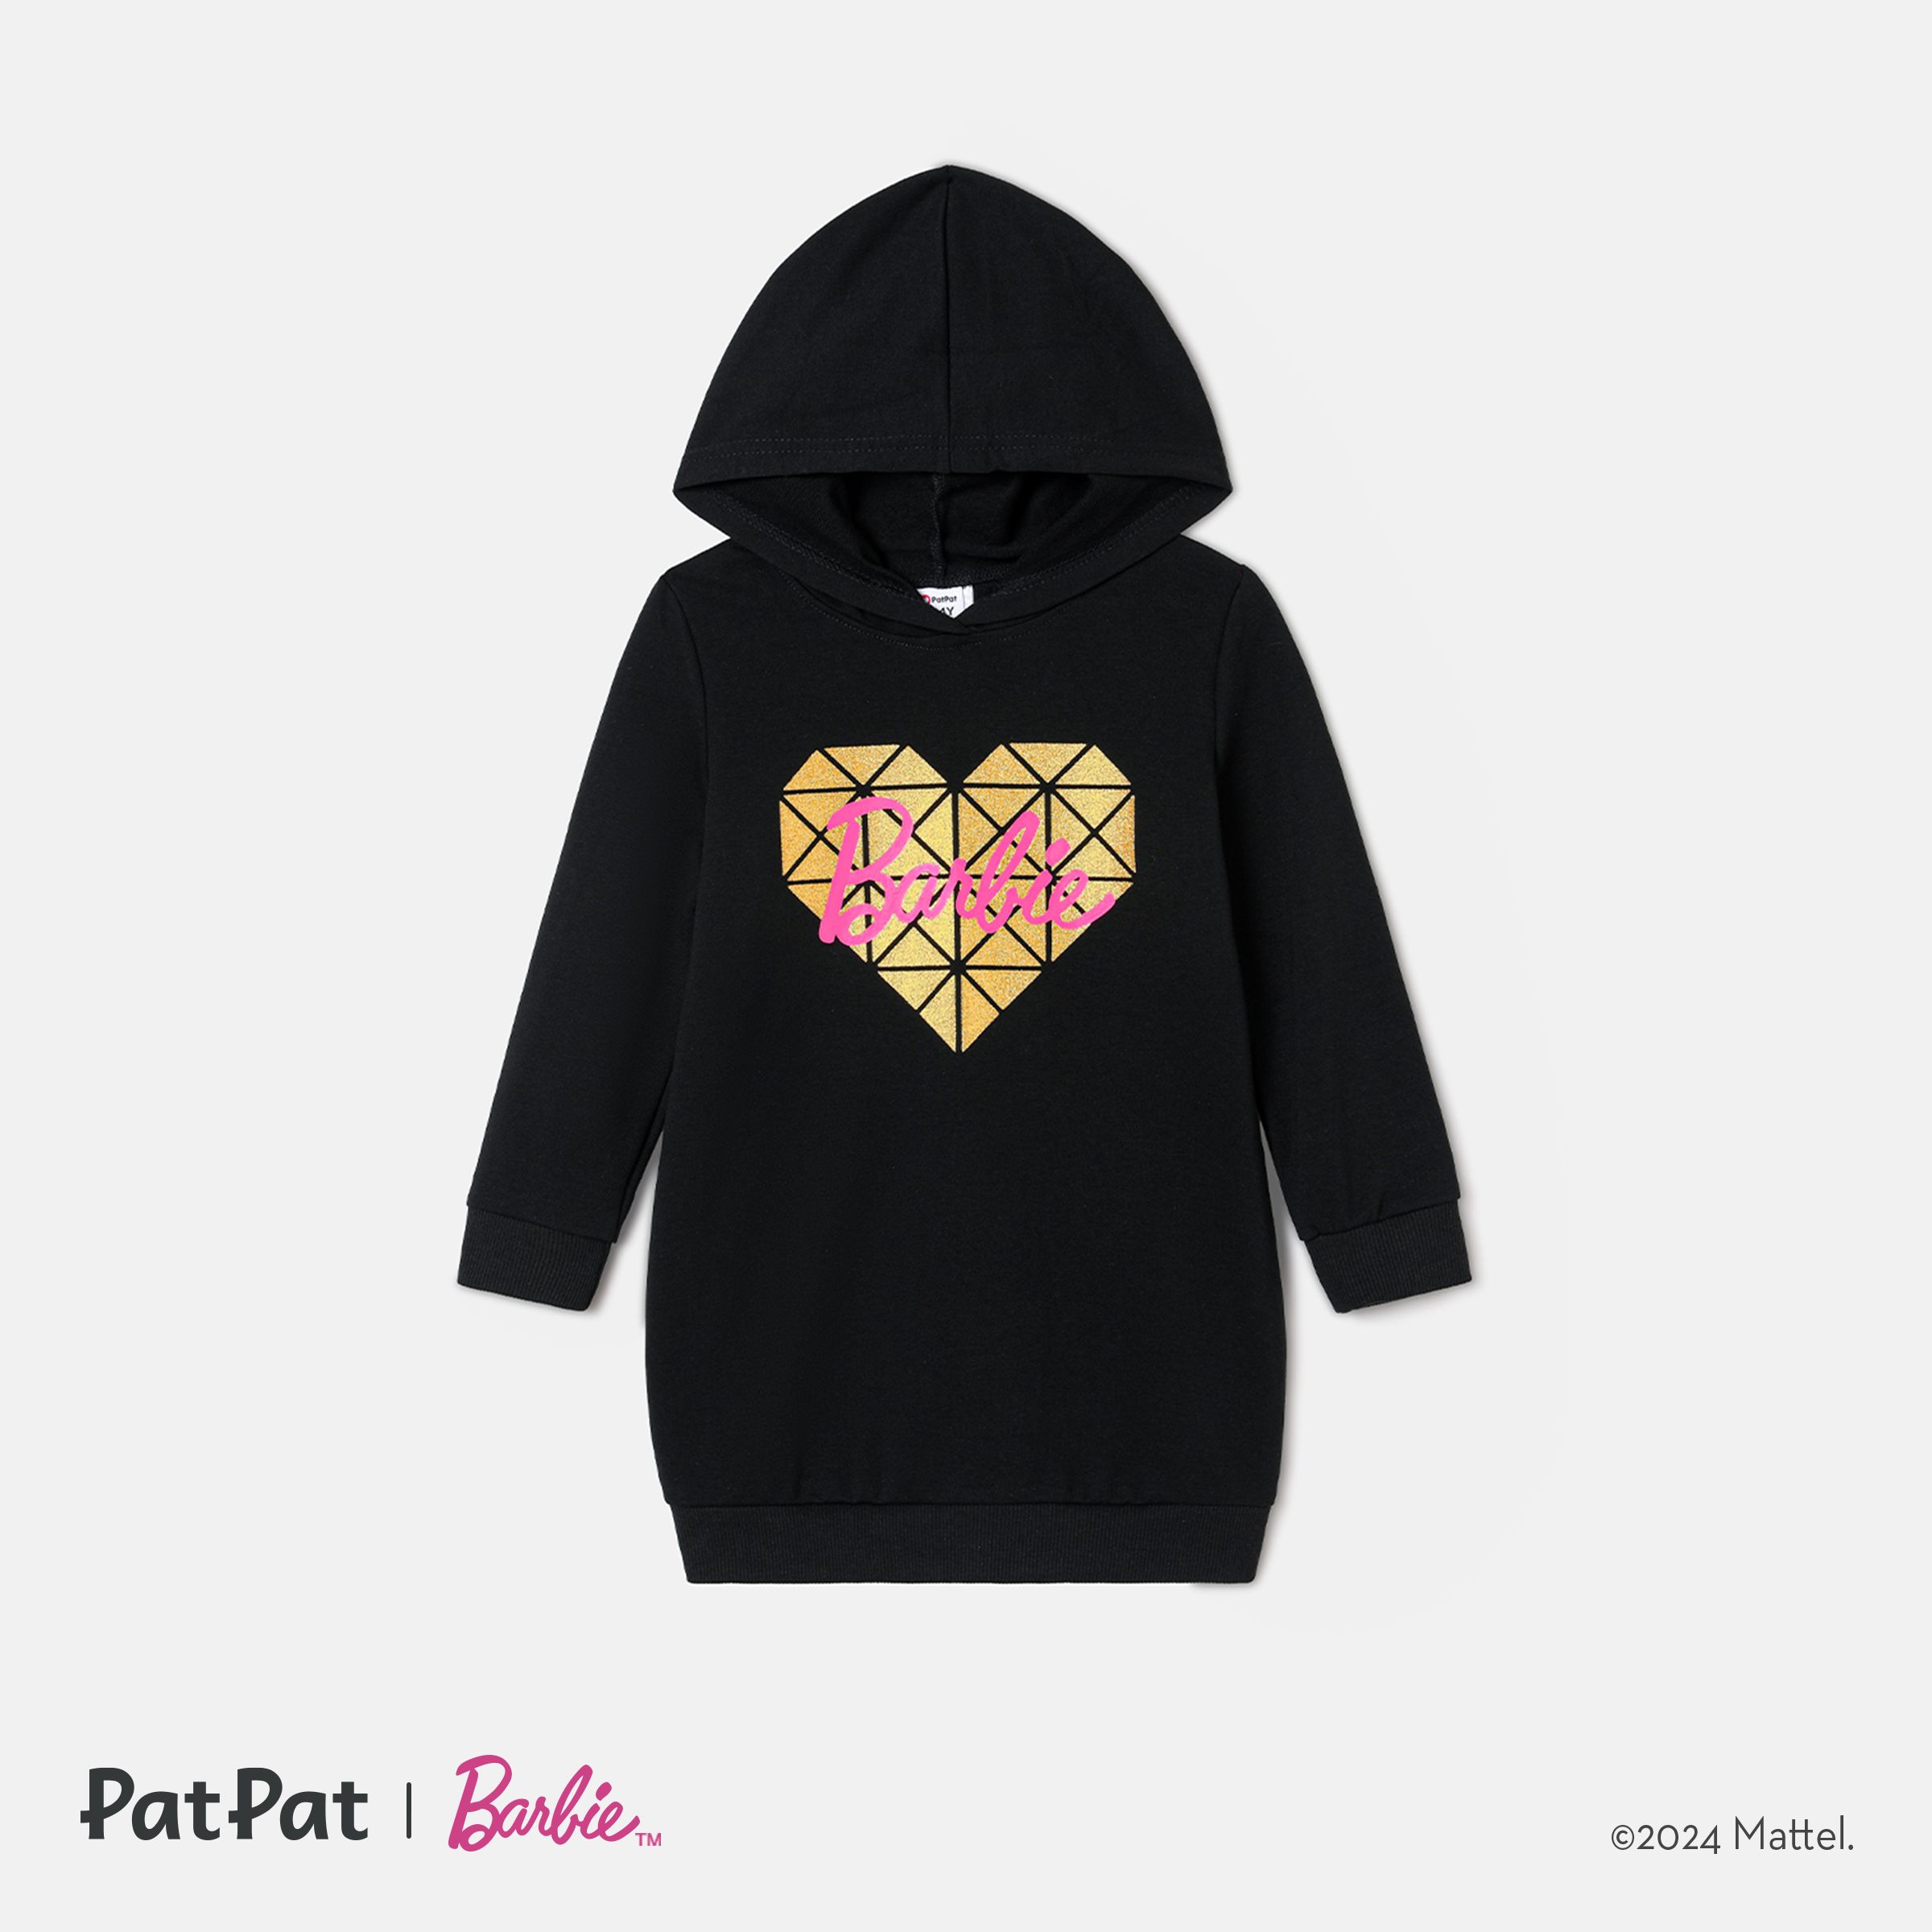 Barbie Mommy and Me Letter Heart Graphic Long-sleeve Hooded Sweatshirt Dress